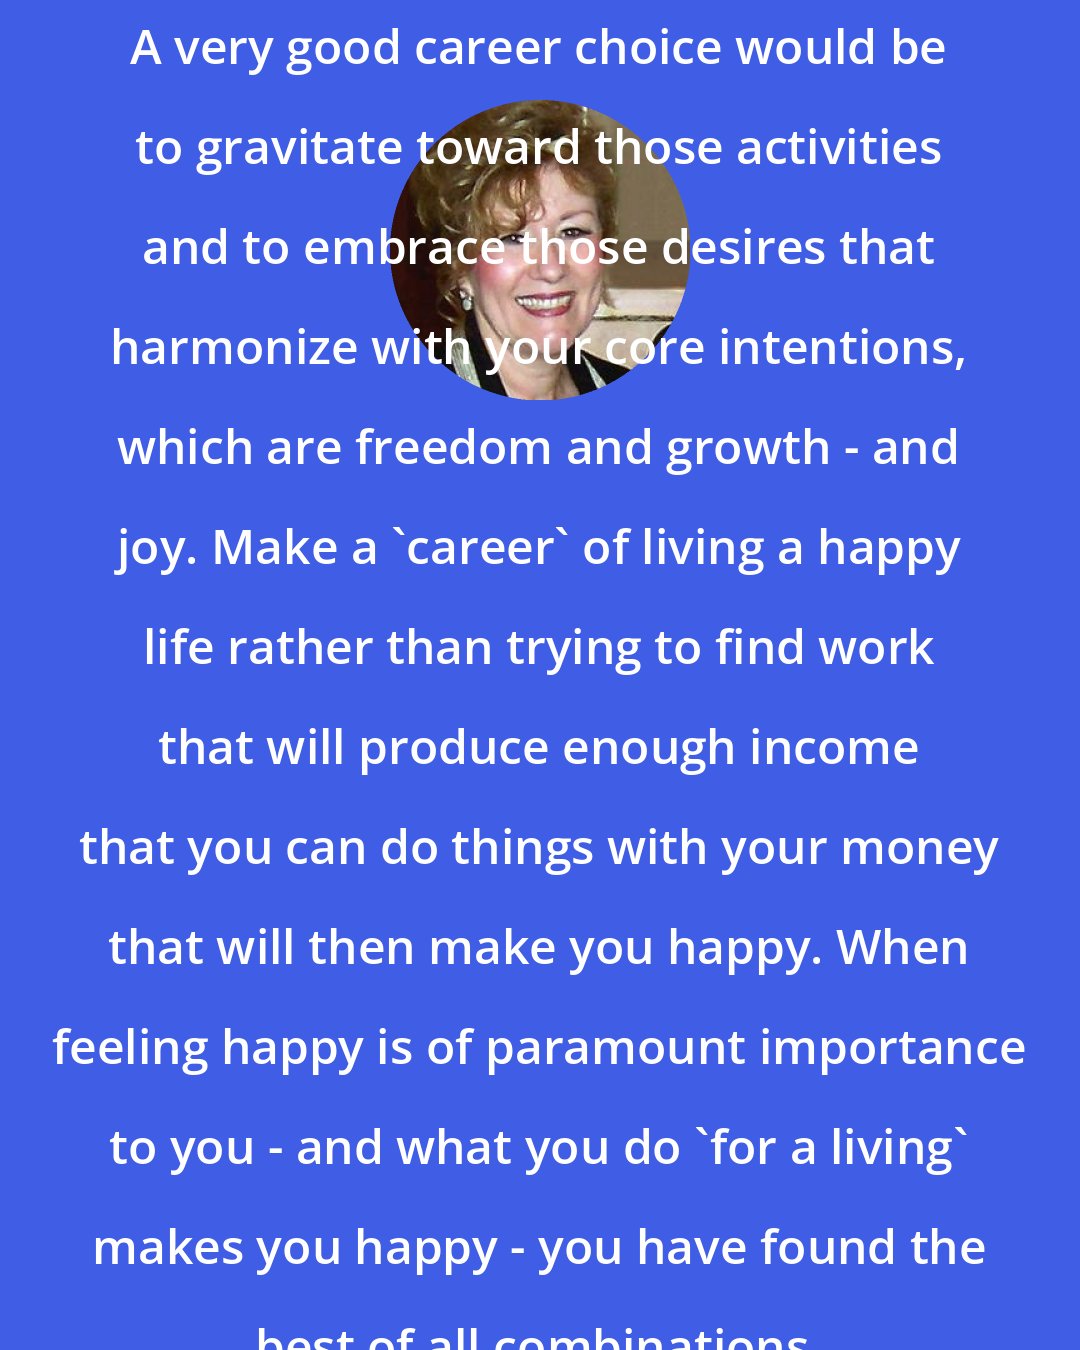 Esther Hicks: A very good career choice would be to gravitate toward those activities and to embrace those desires that harmonize with your core intentions, which are freedom and growth - and joy. Make a 'career' of living a happy life rather than trying to find work that will produce enough income that you can do things with your money that will then make you happy. When feeling happy is of paramount importance to you - and what you do 'for a living' makes you happy - you have found the best of all combinations.